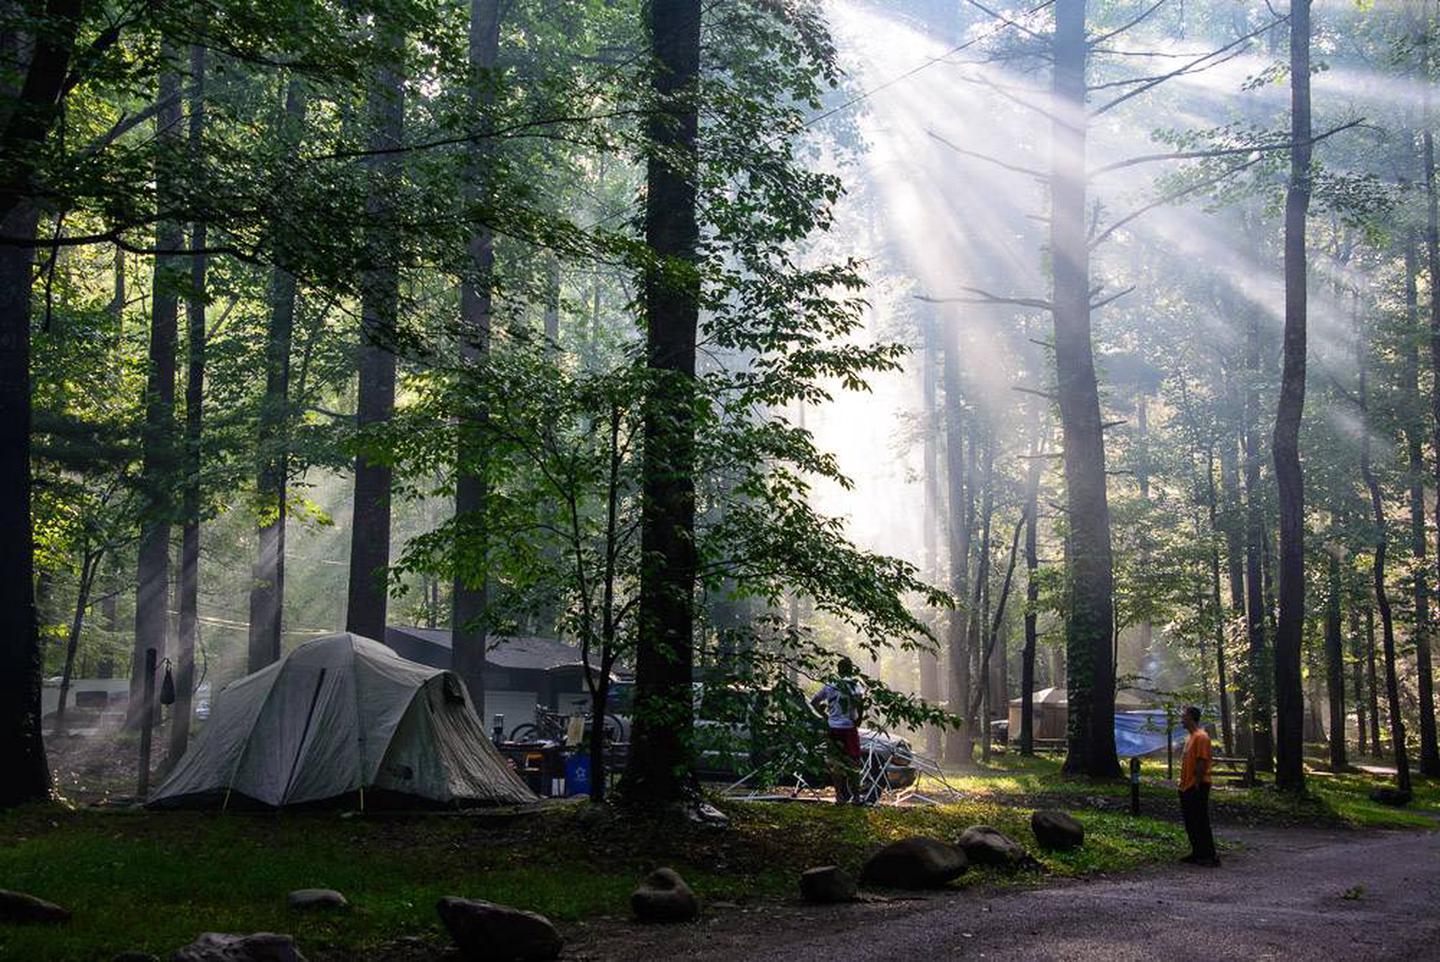 Sun shining through the forest over an occupied campsite.